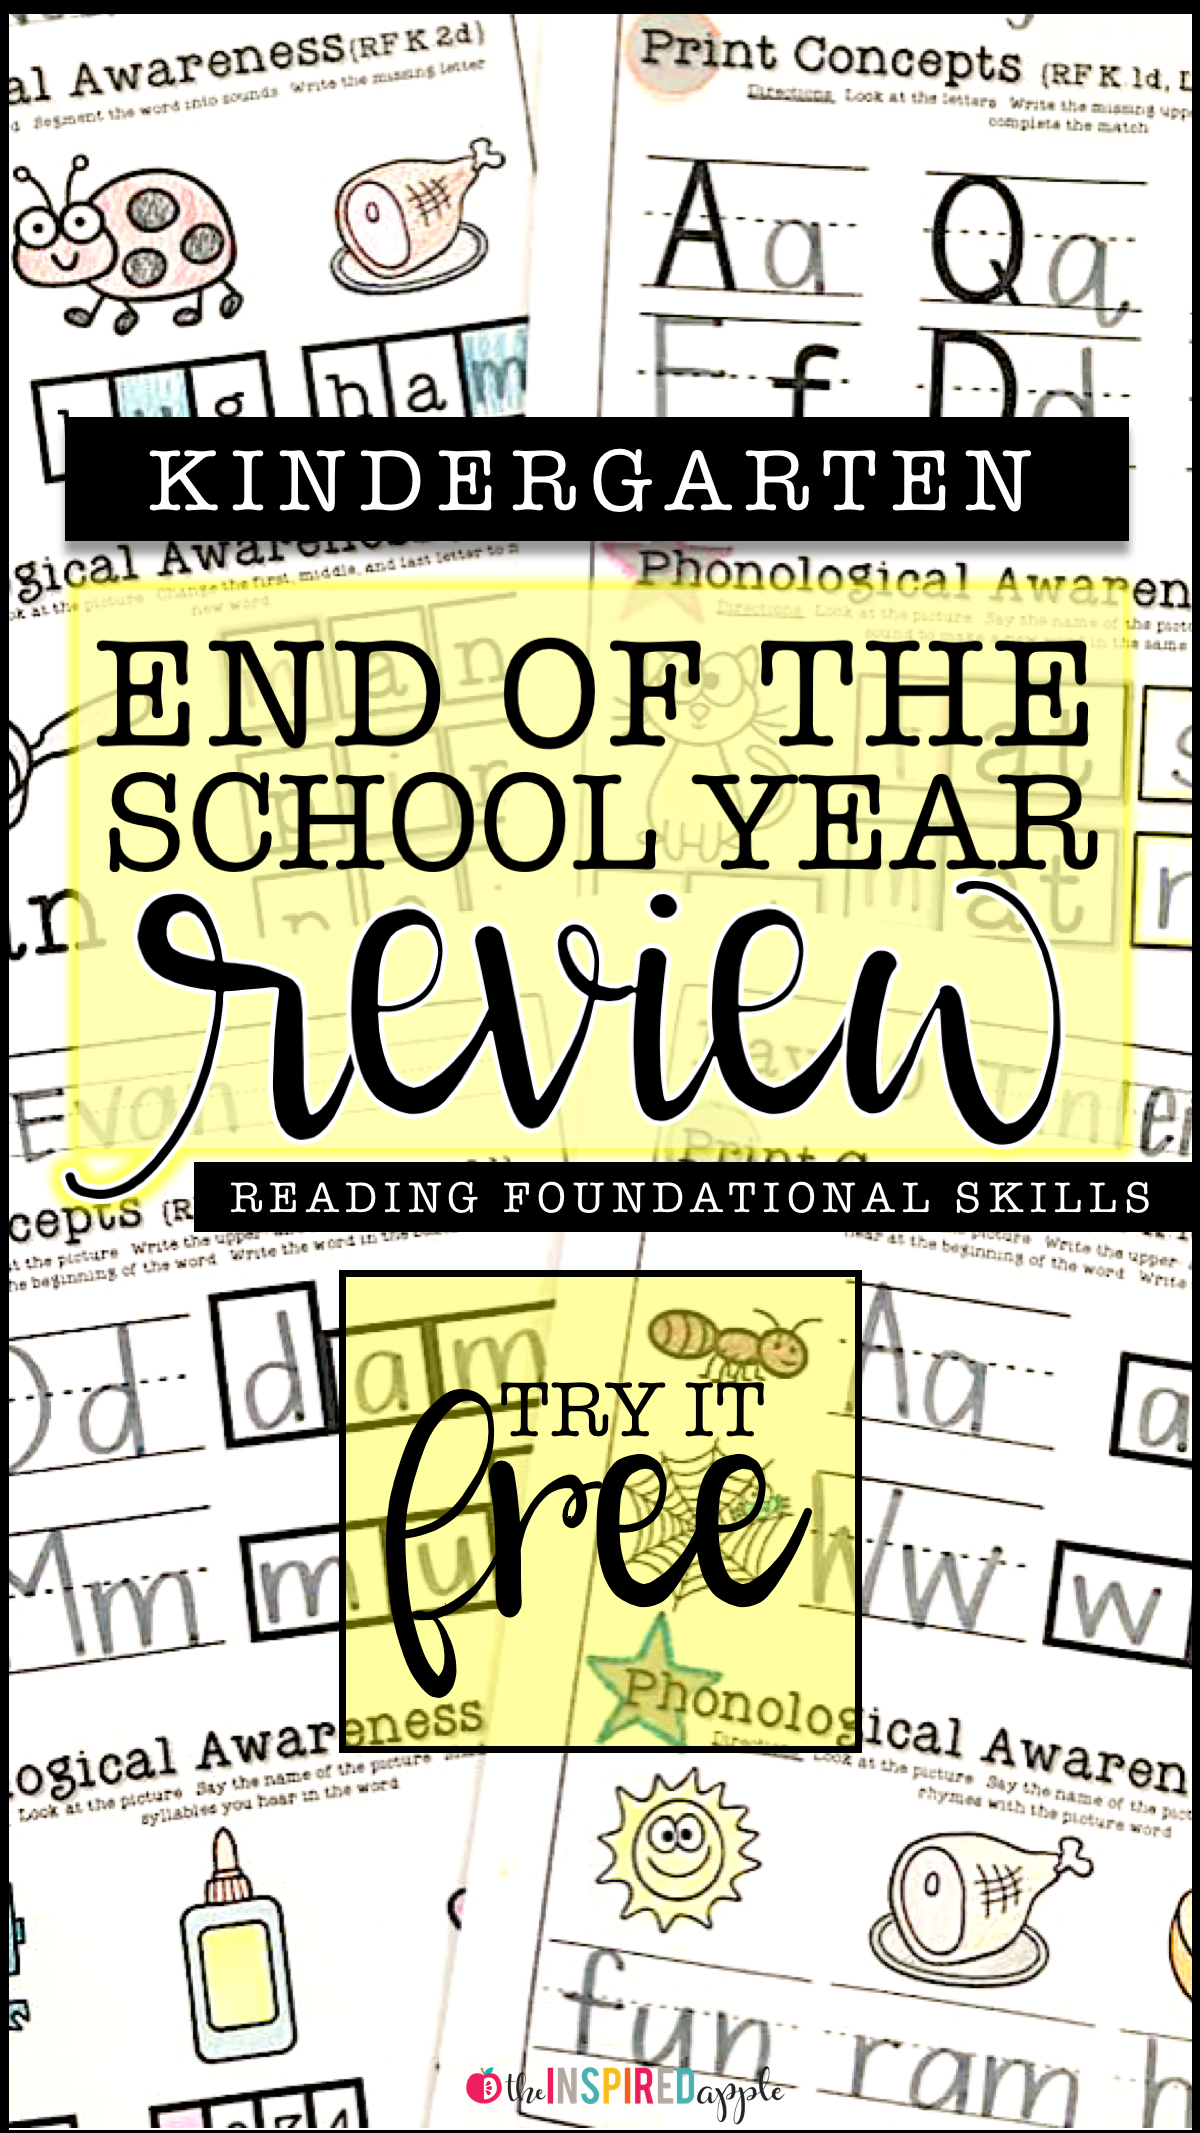 Are you looking for a great way to review reading foundational and literacy skills with your kindergarten students? This review packet is full of activities that are just PERFECT for helping you do just that! There are twenty days worth of review, that help with everything from phonics to word recognition to phonemic awareness to writing and more! Plus, you can try a sample day for FREE!